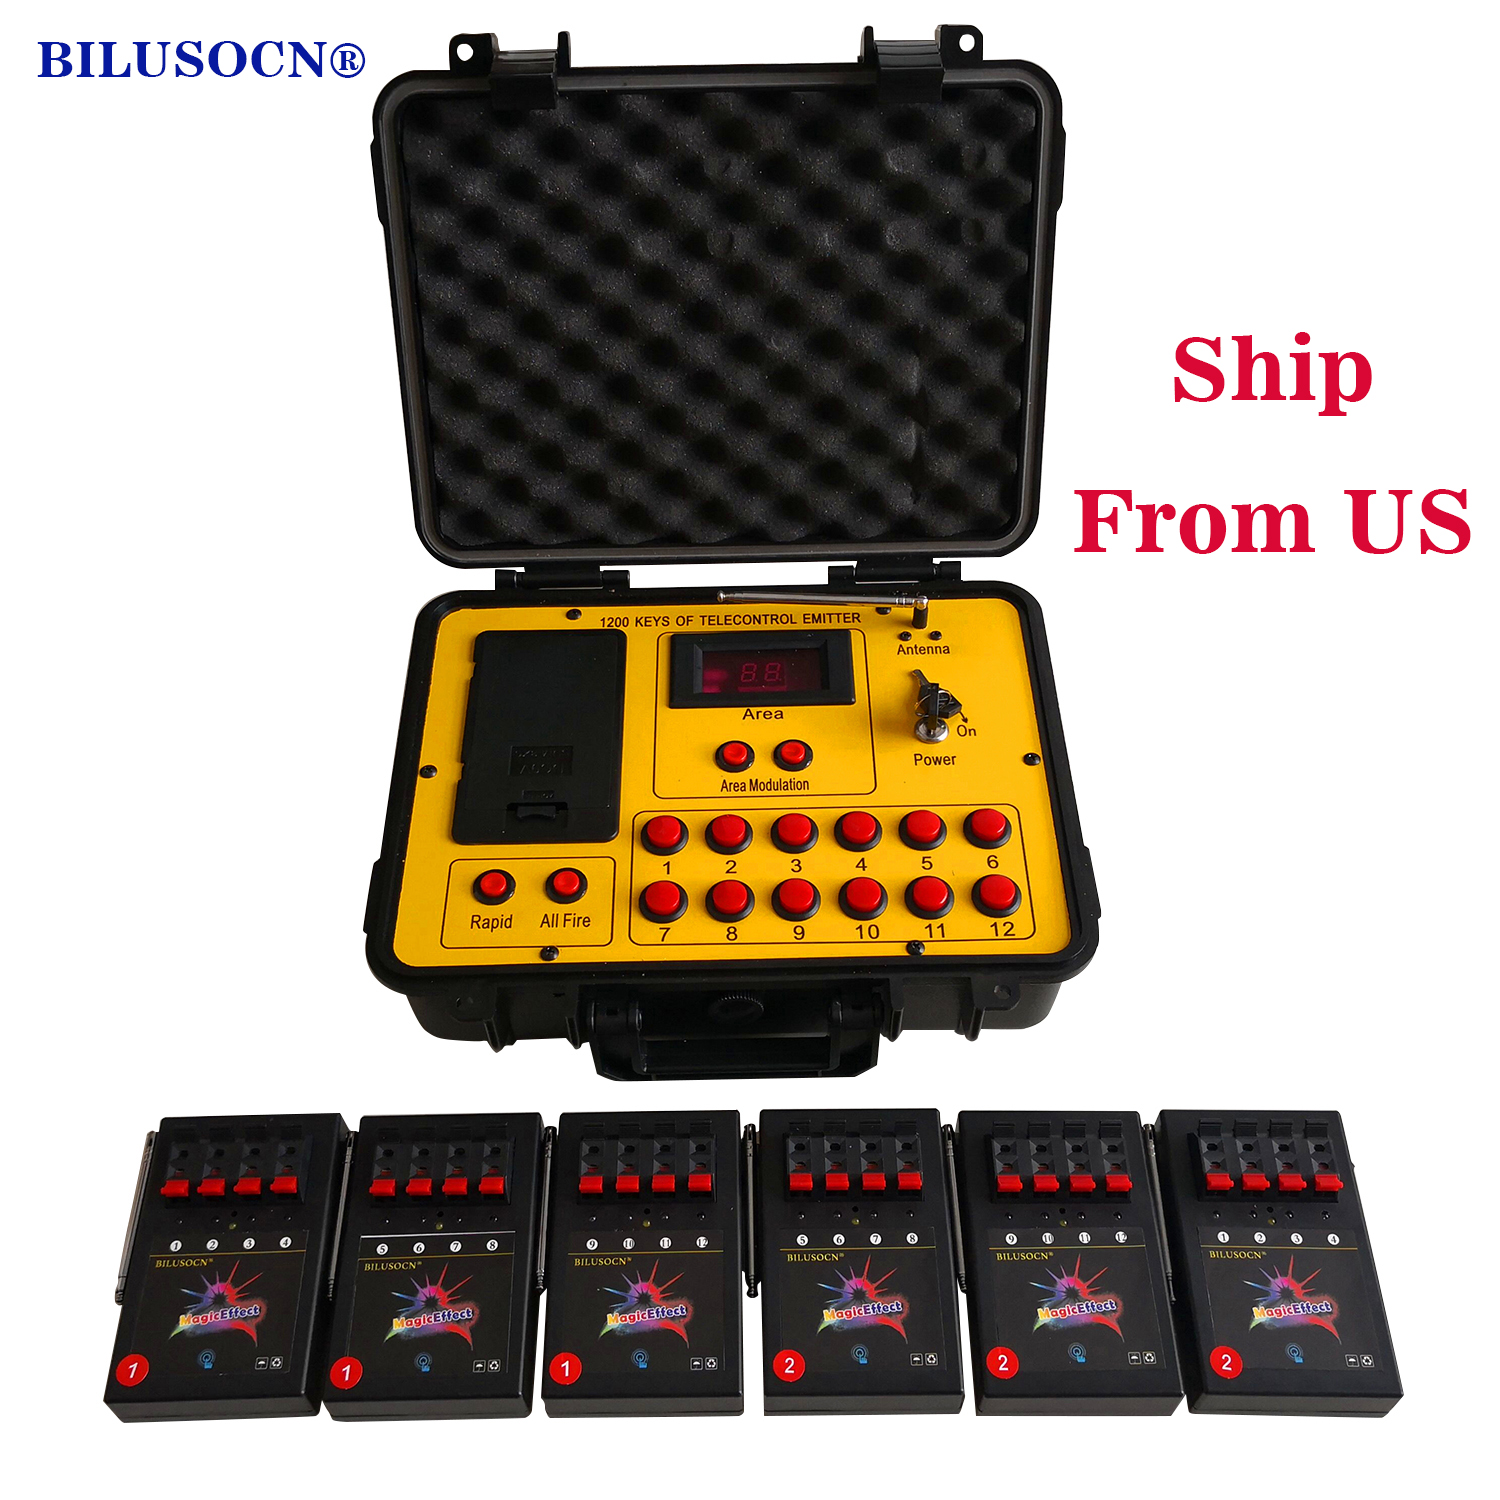 Shipping From USA Bilusocn 500M distance+24 Cues Fireworks Firing System ABS Waterproof Case remote Control Equipment